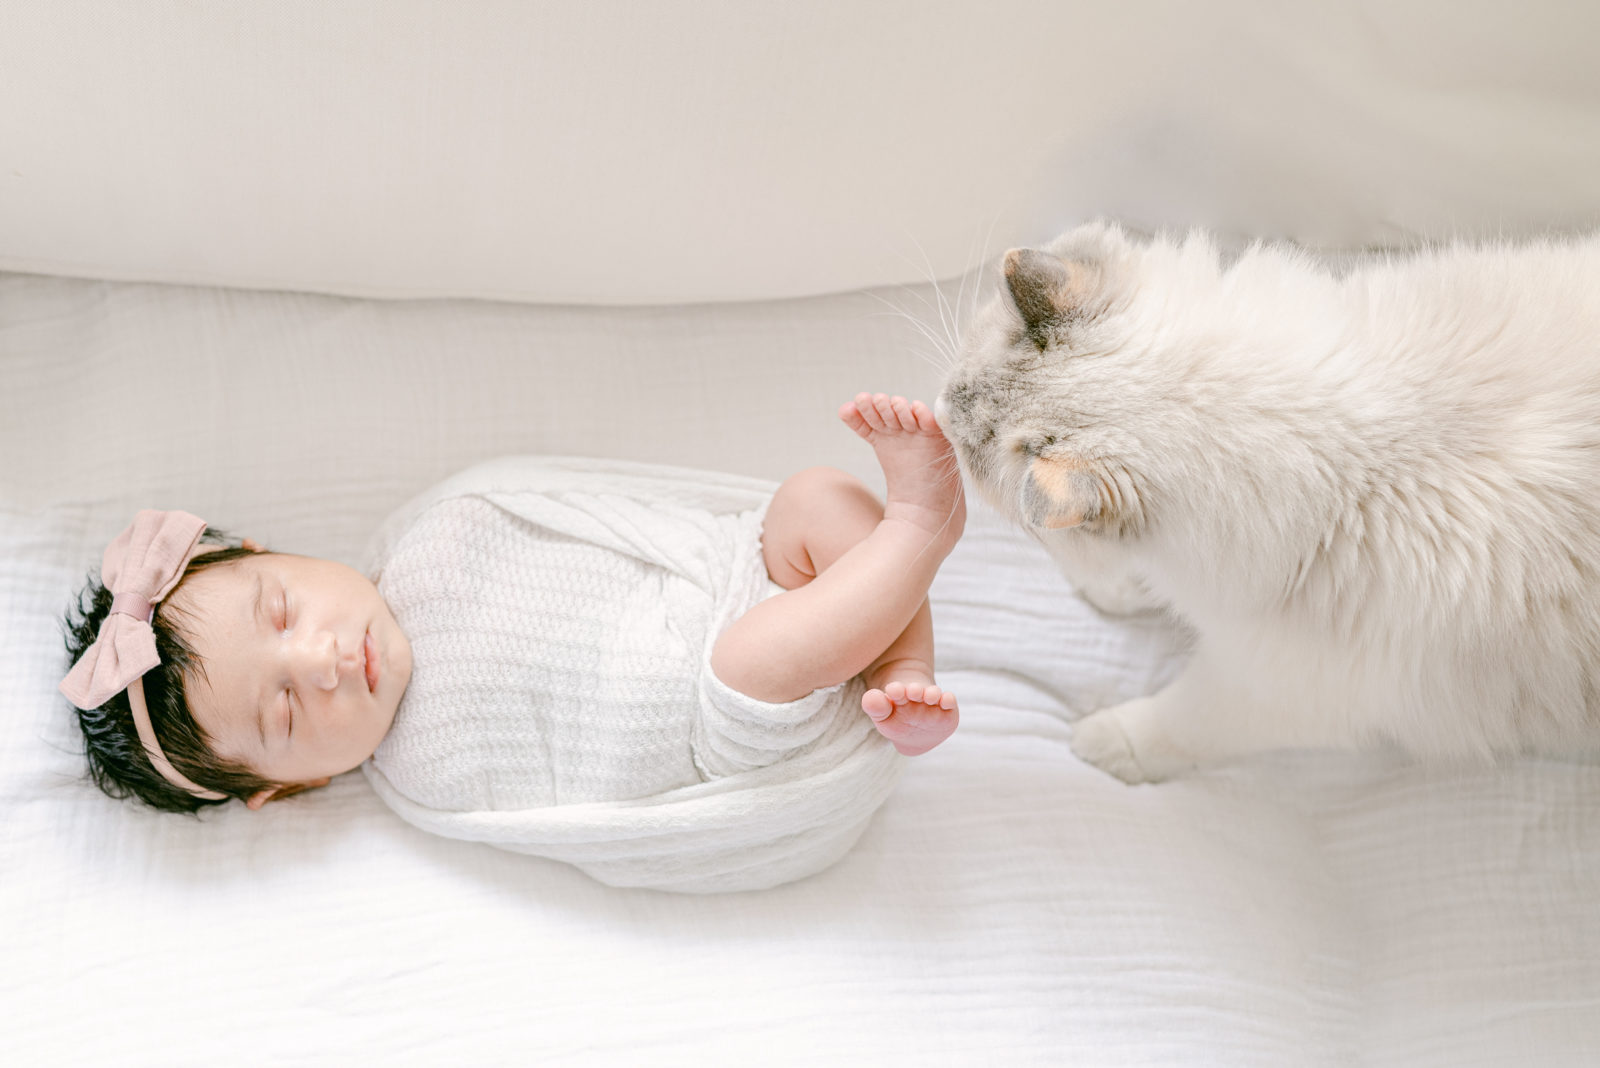 Cat comes to smell newborn baby 